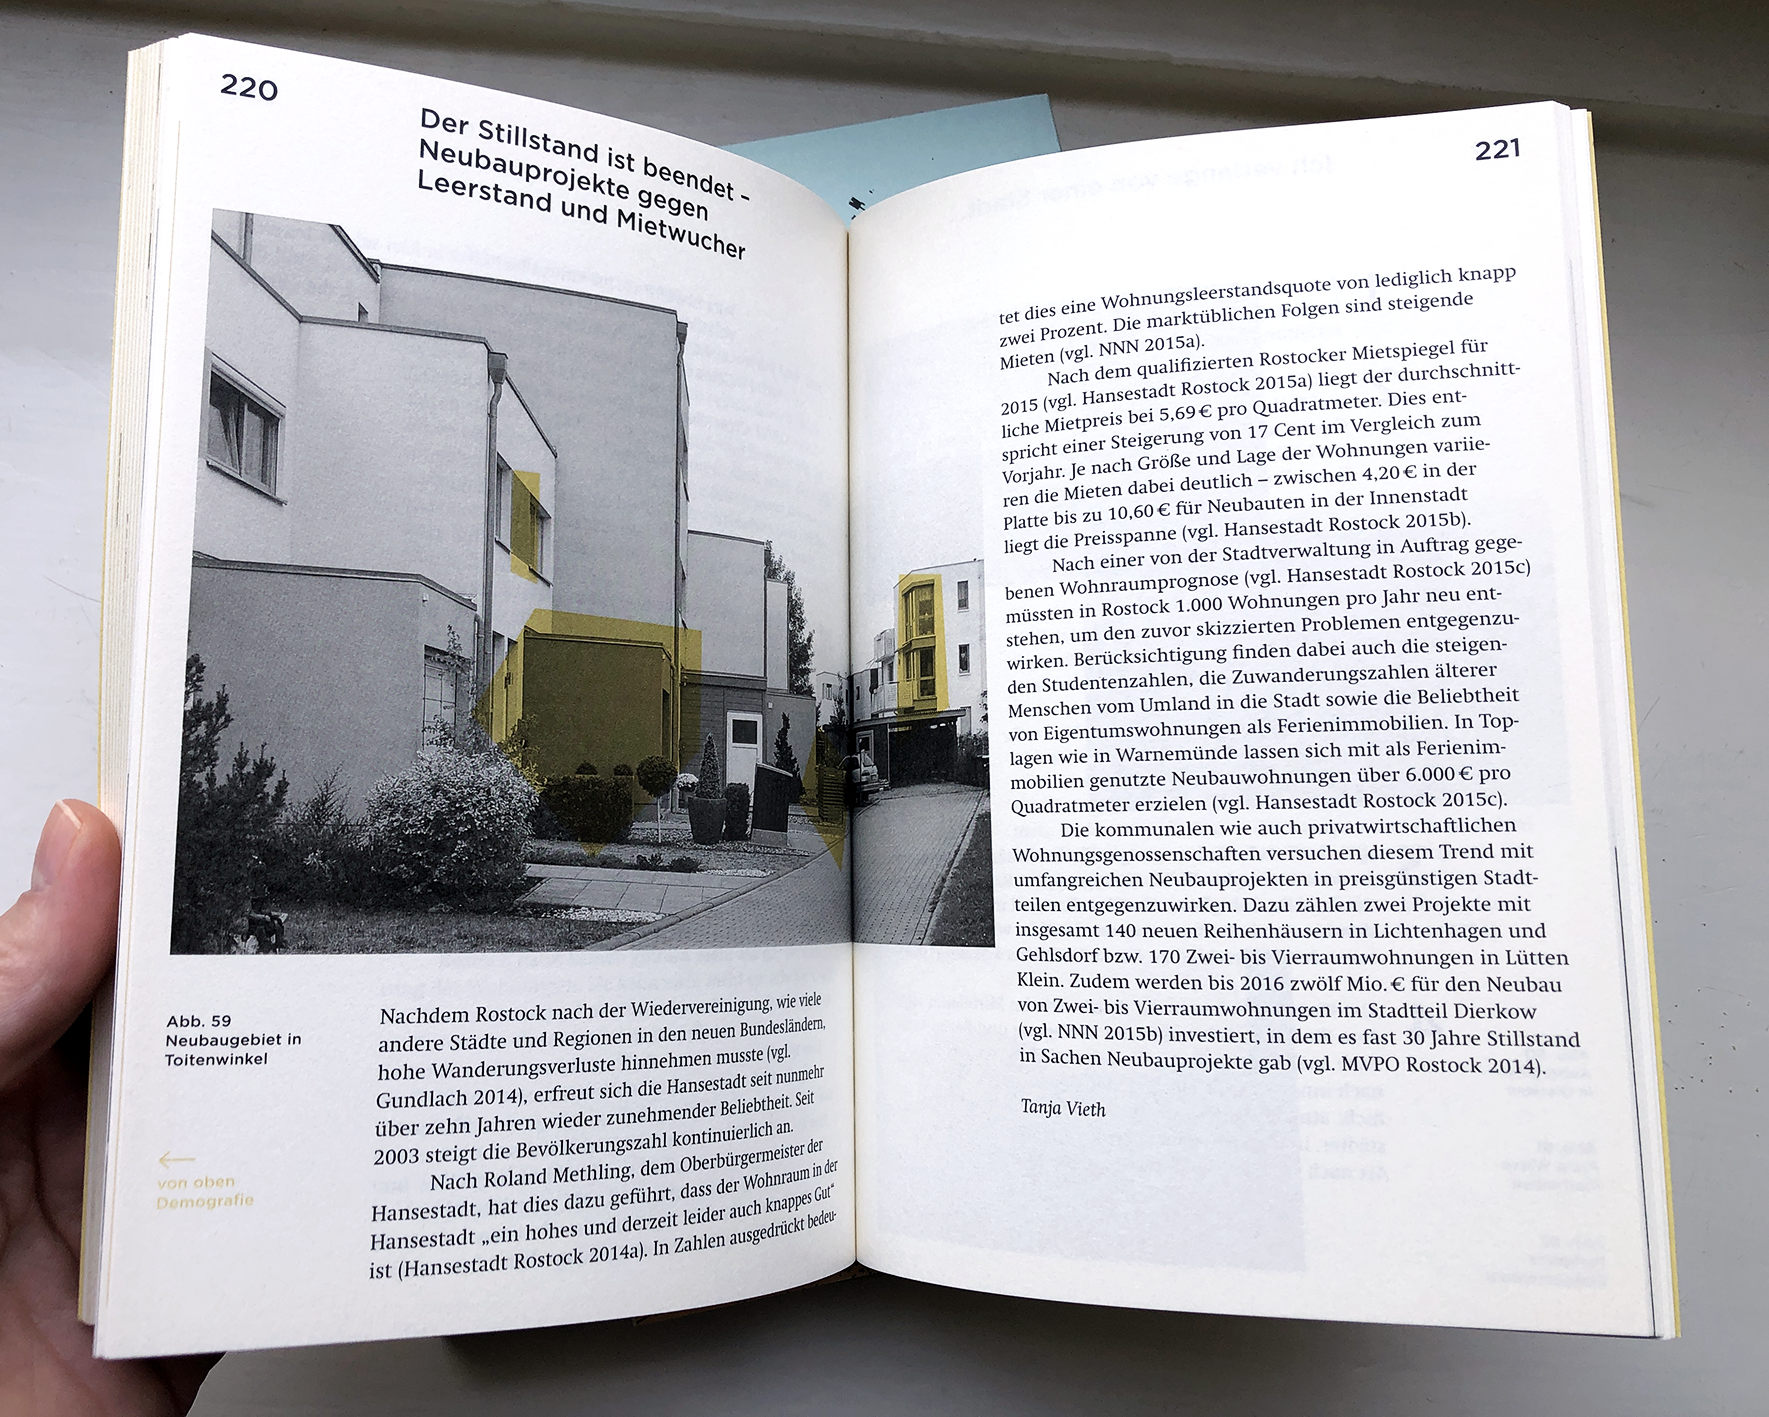 Excerpt from a study on life and developments in large housing estates around the city of Rostock.